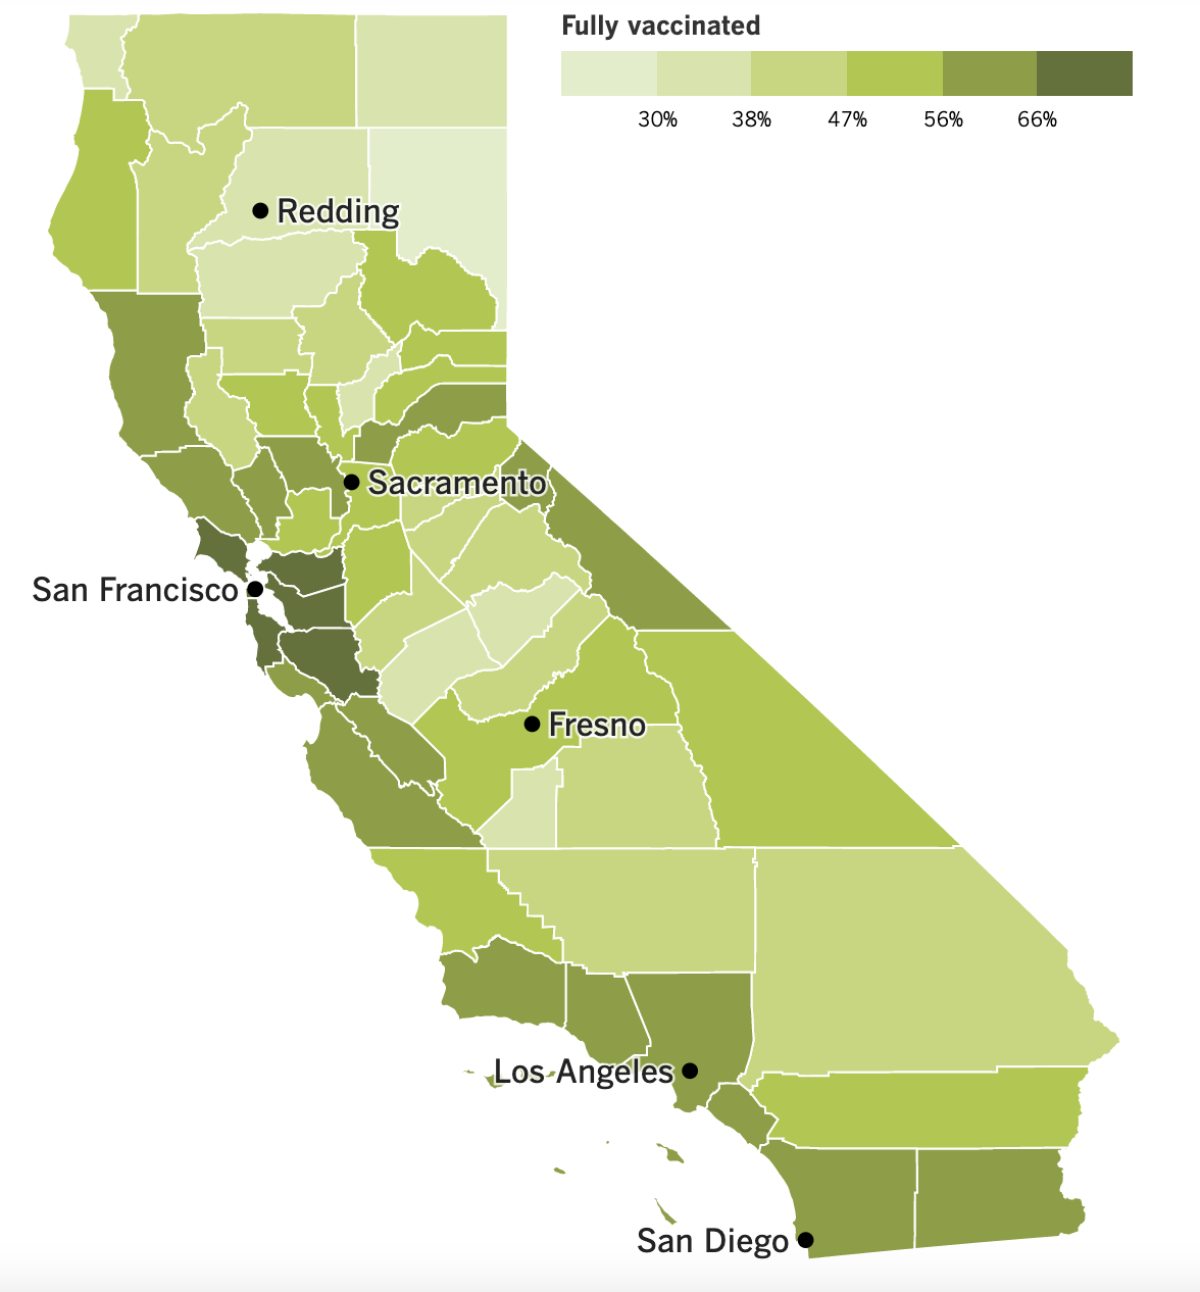 A map showing California's vaccination progress, by county.